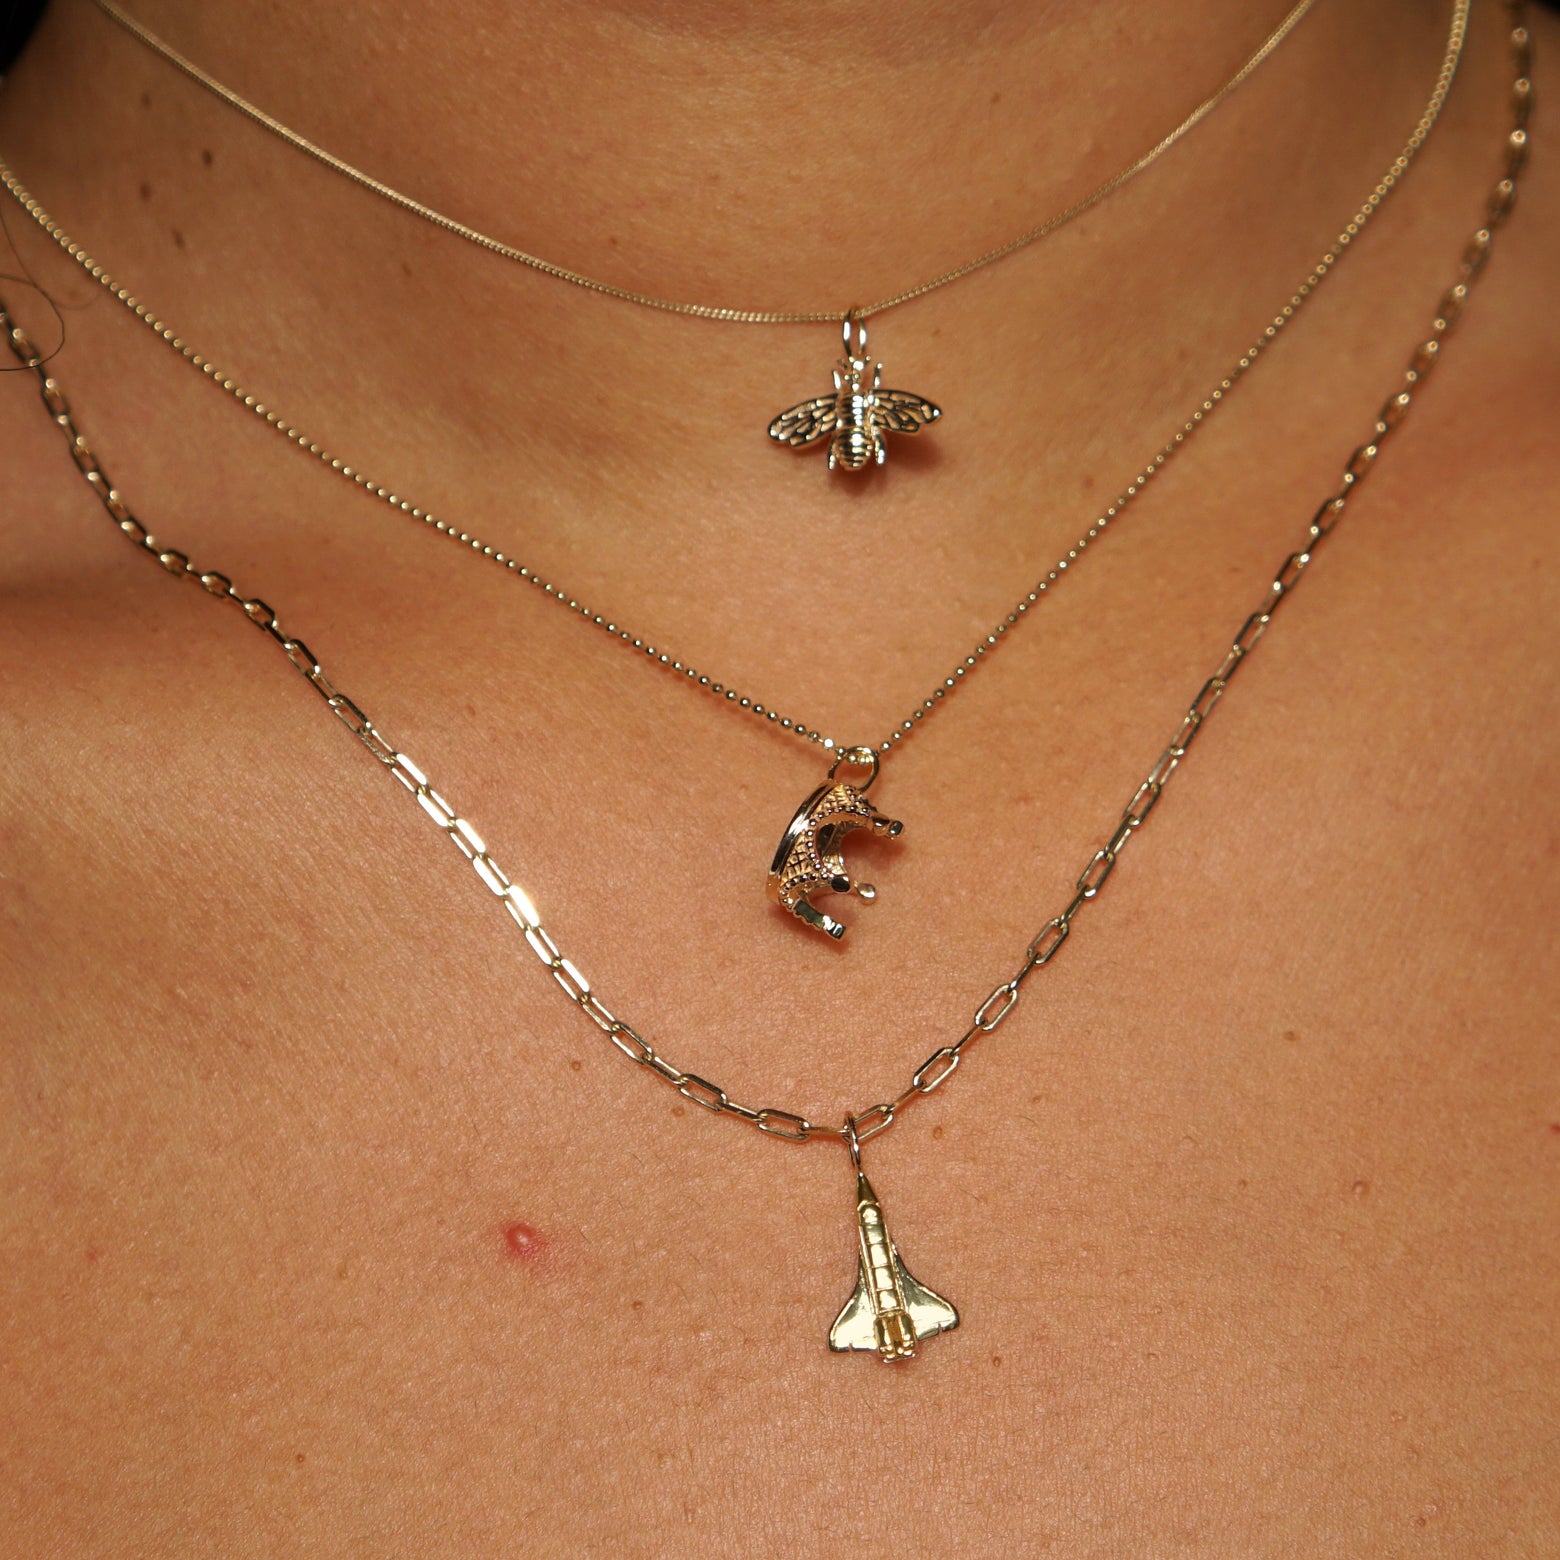 Model wearing a Bee Charm on an Essential Chain, A Crown Charm on a Bead Chain, and a Space Shuttle Charm on a Butch Chain